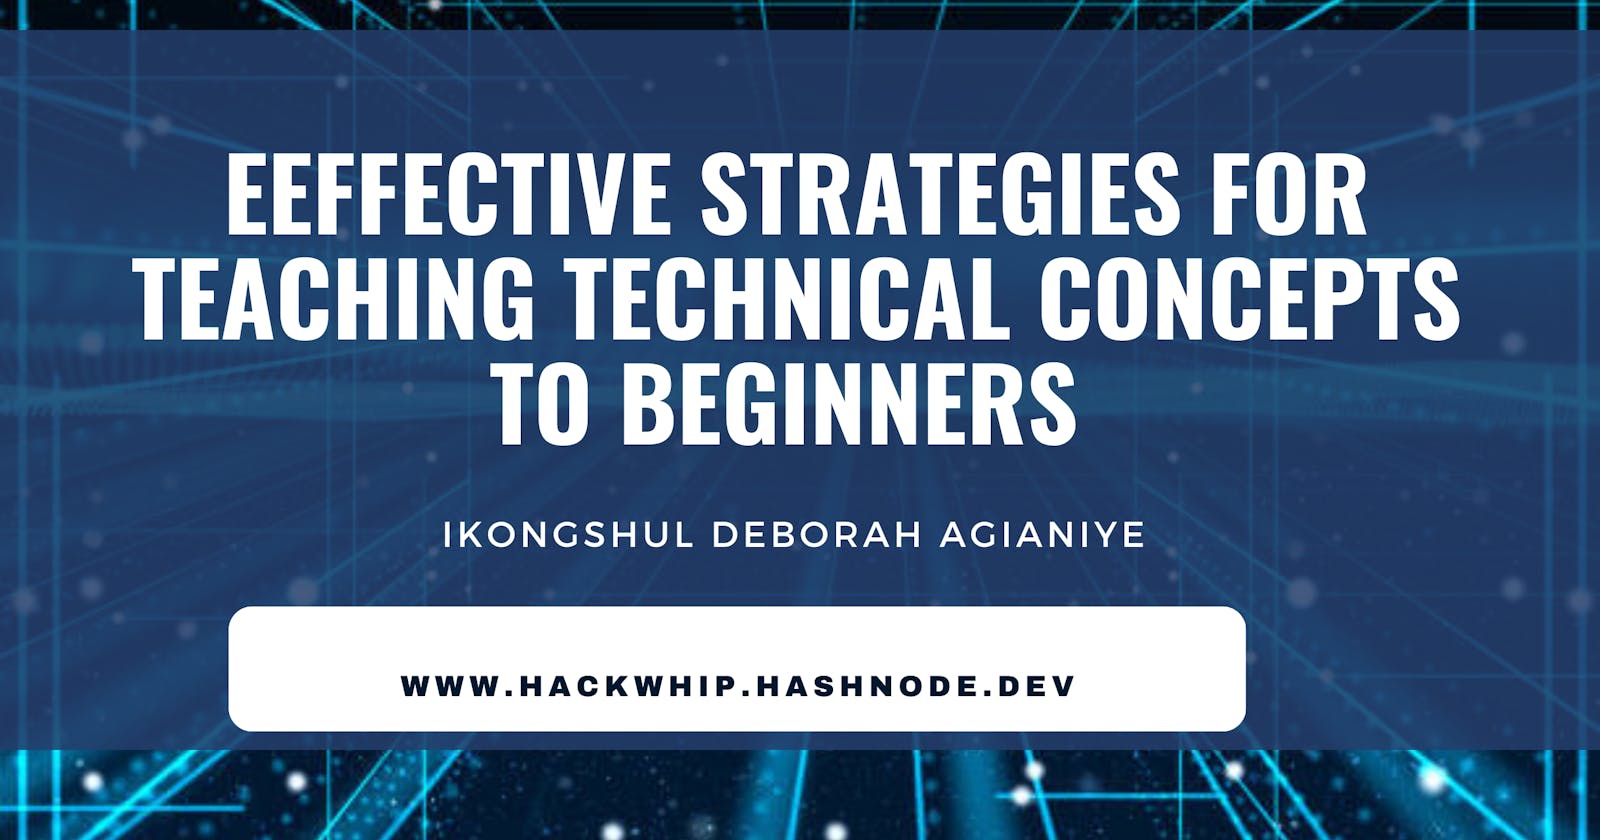 Effective strategies for teaching technical concepts to Beginners.